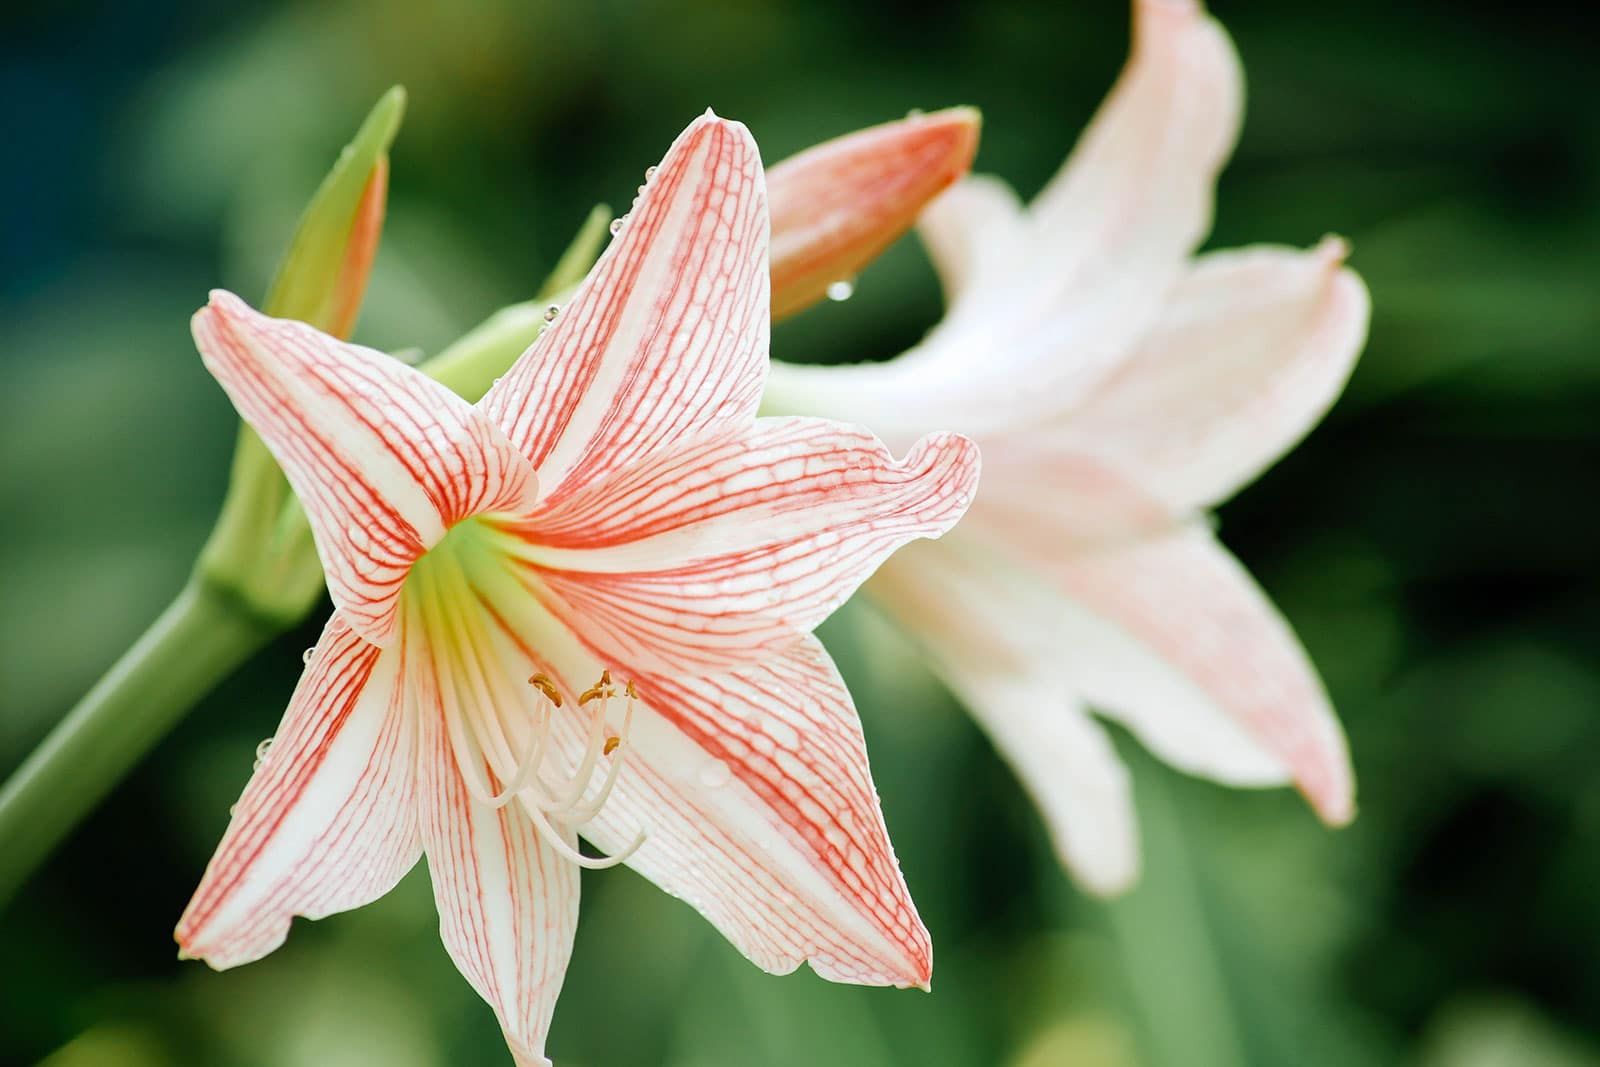 Close-up of white amaryllis flowers with red veins